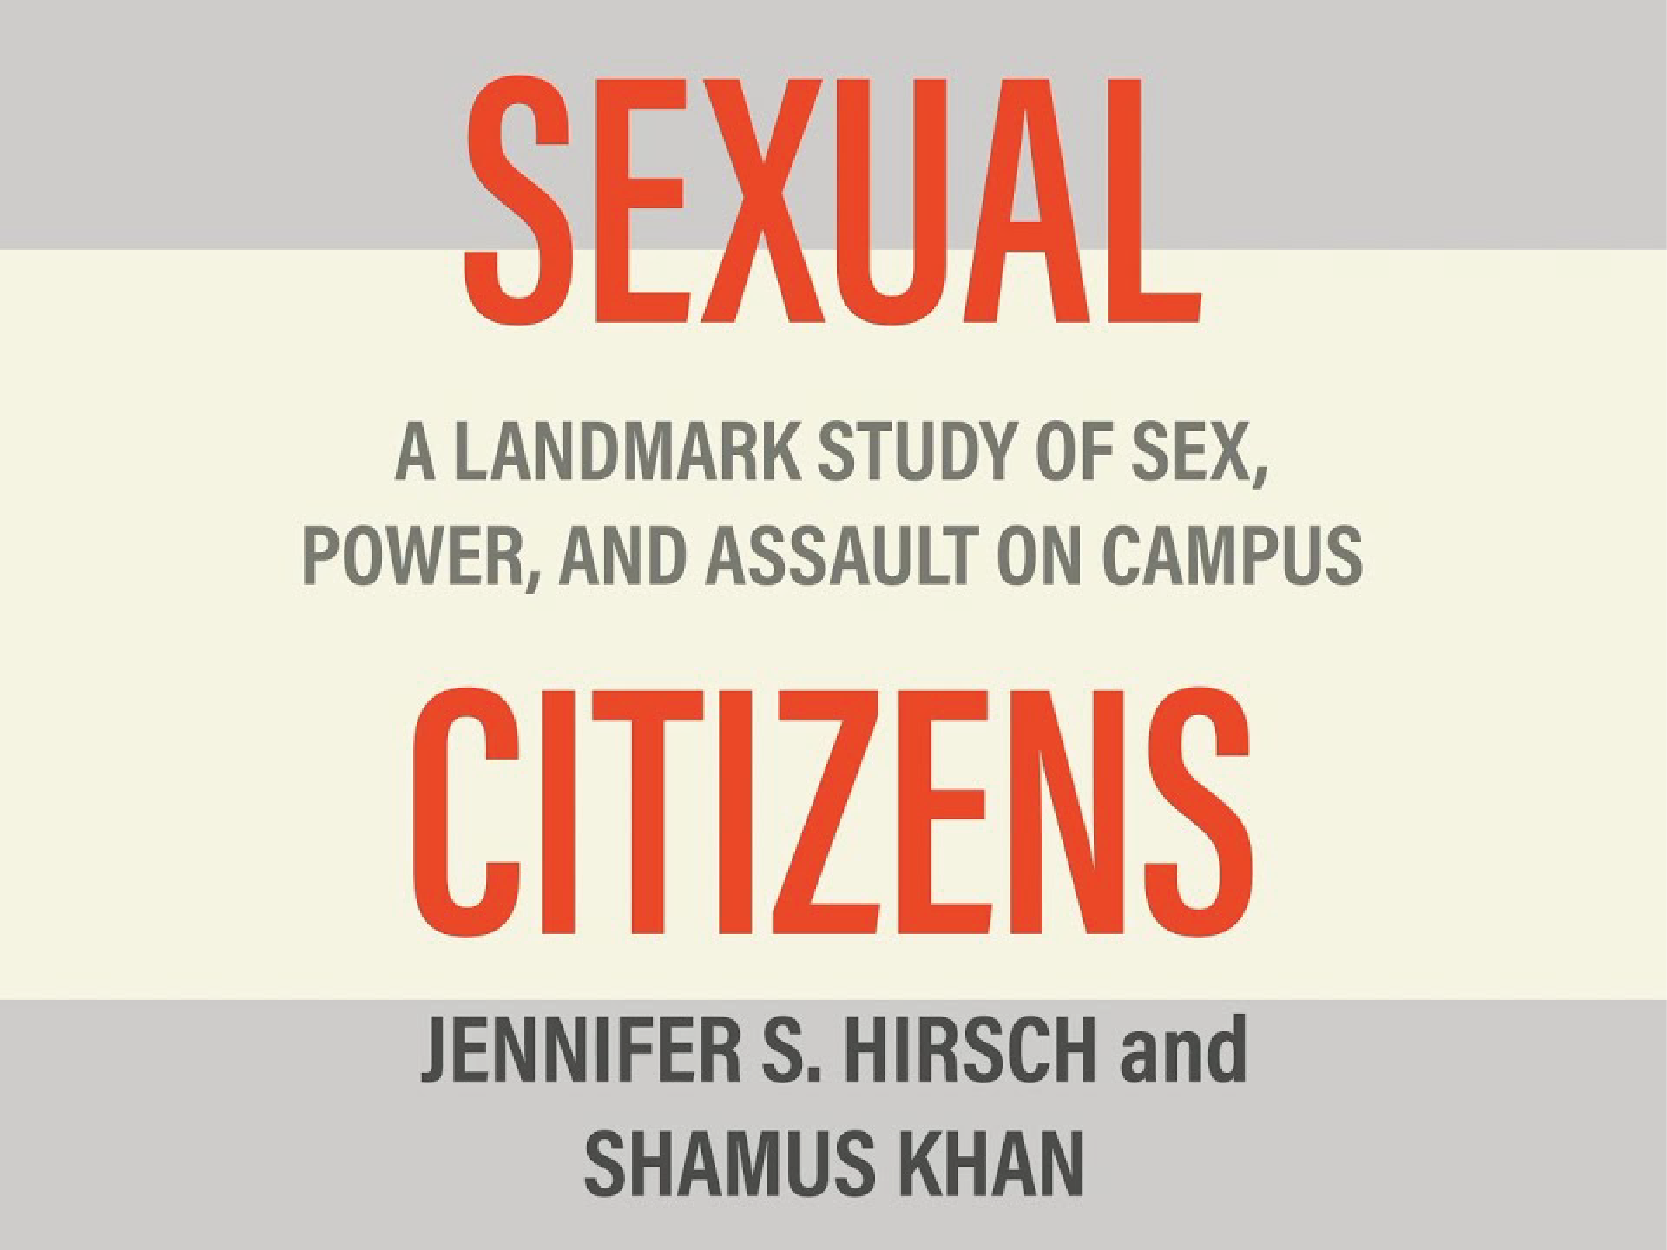 Image that says "Sexual Citizens: A Landmark Study of Sex, Power and Assault on Campus by Jennifer S. Hirsch and Shamus Khan